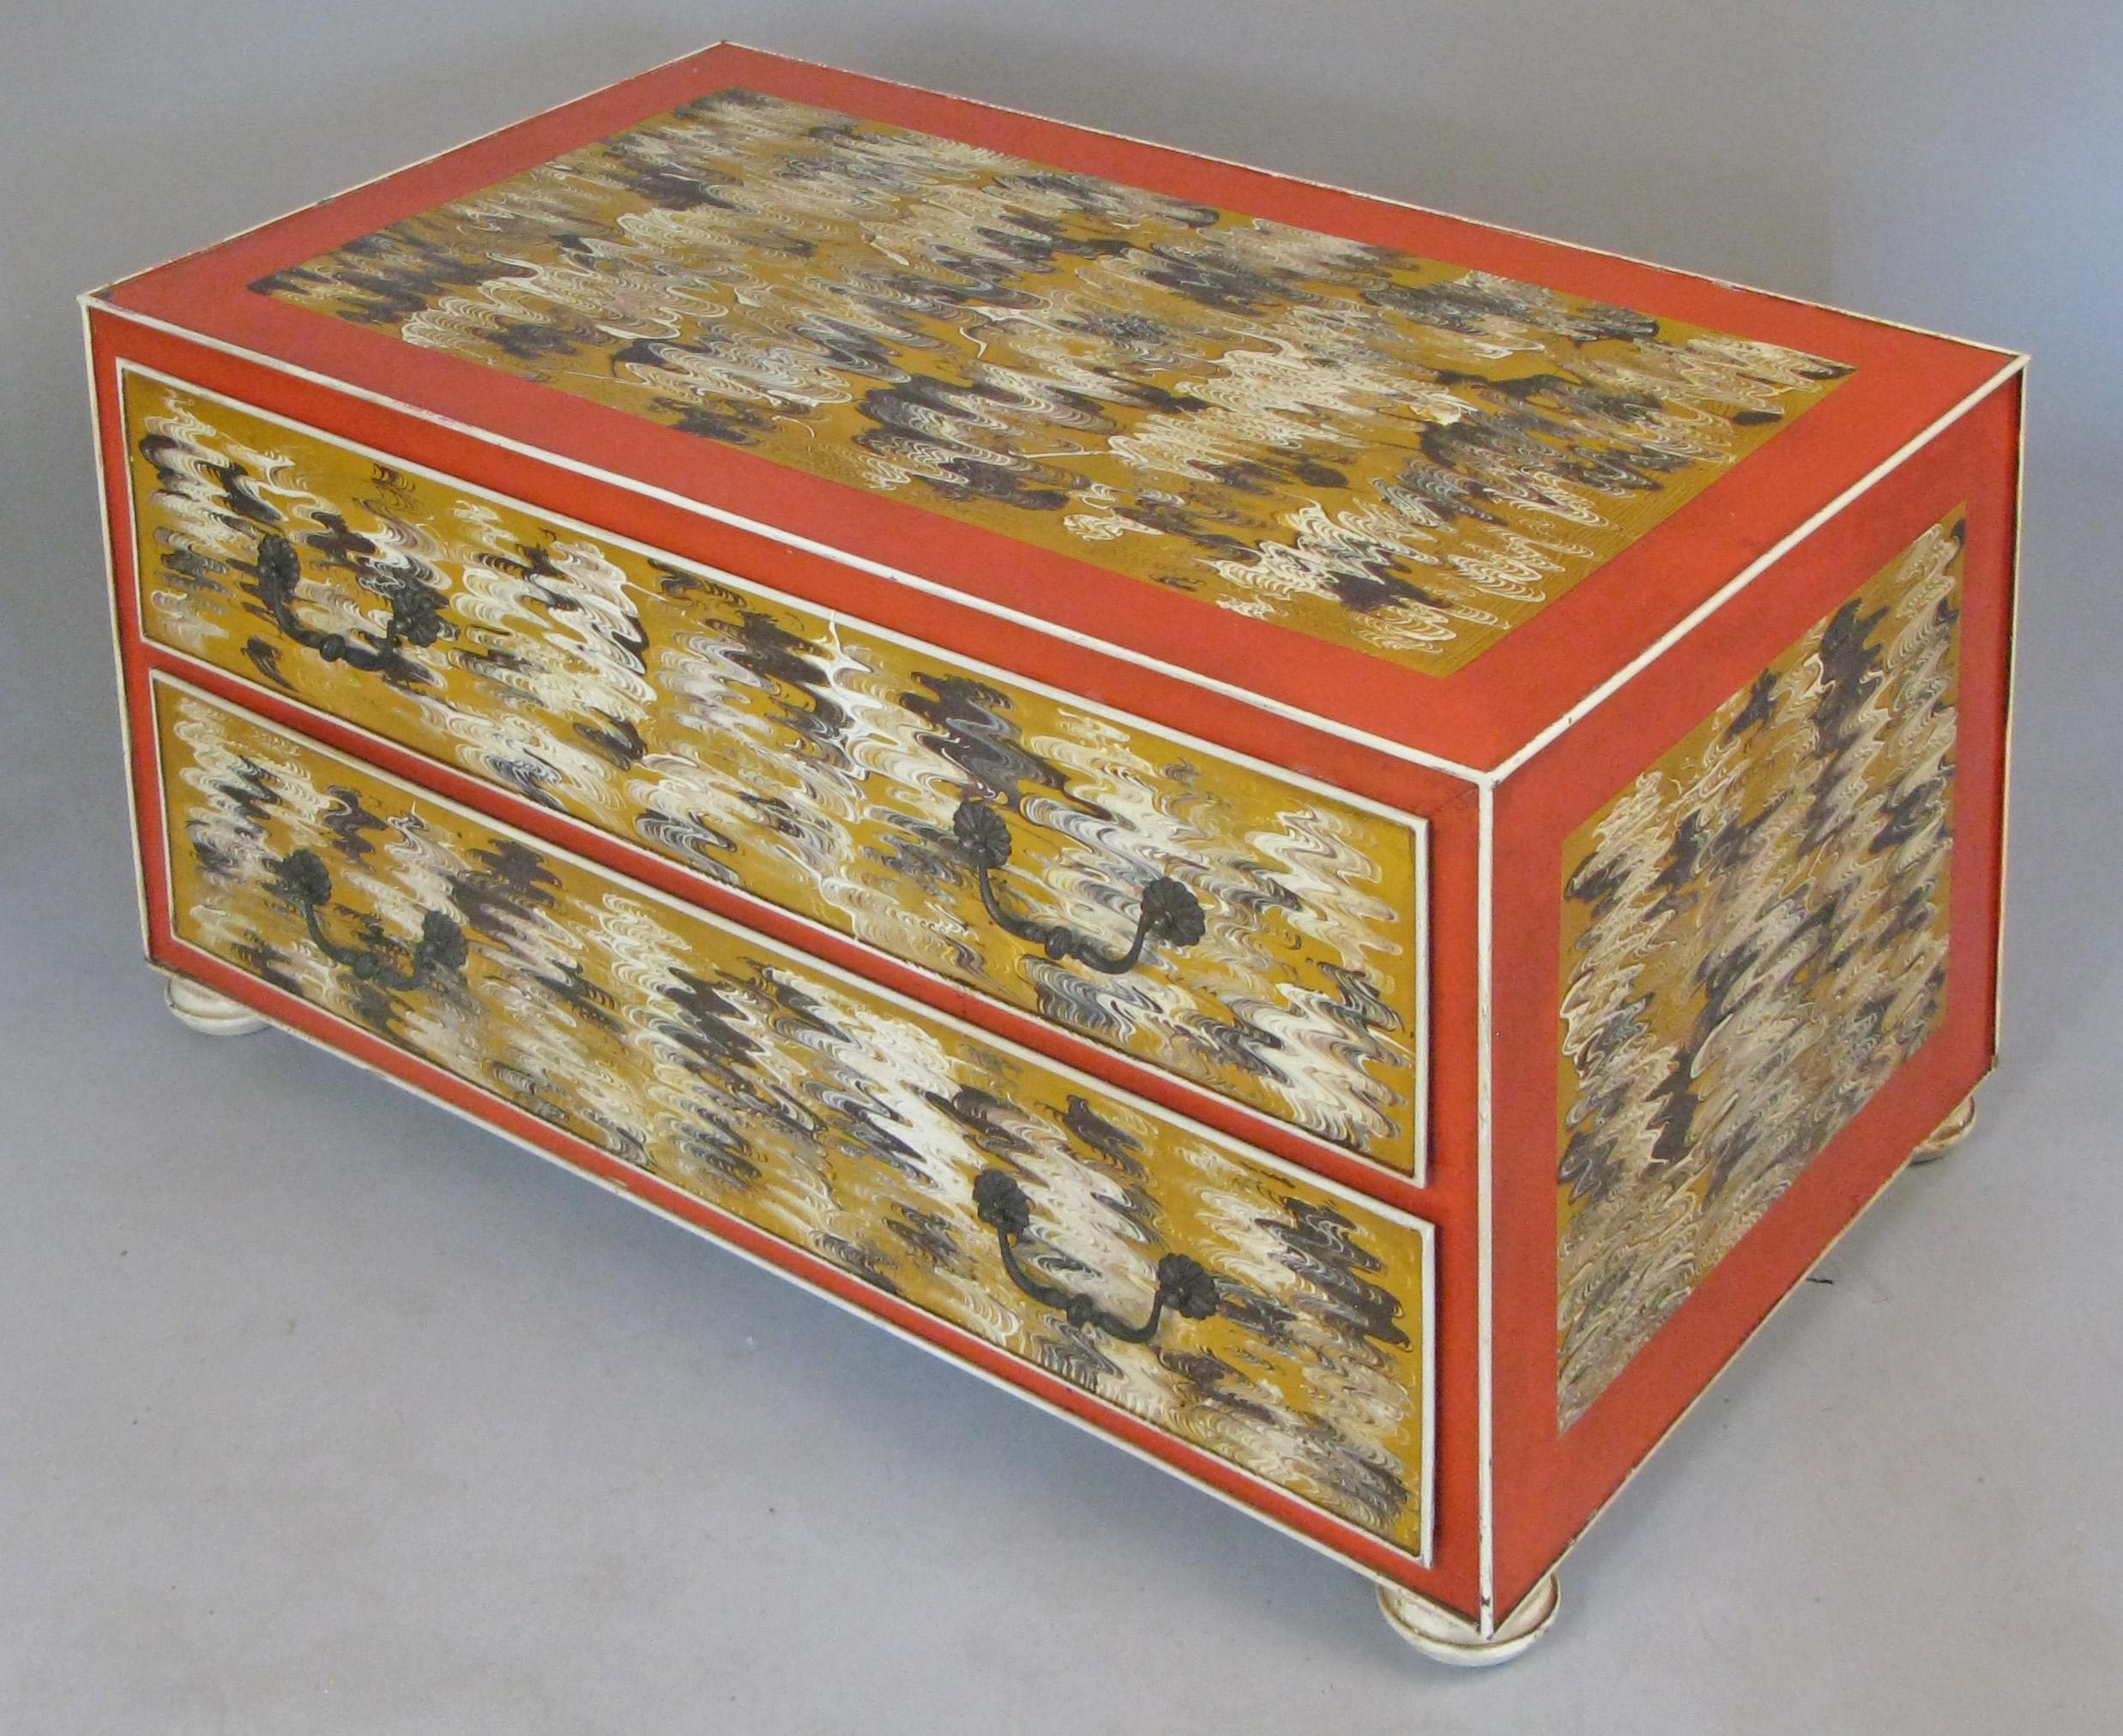 A charming vintage 1960s low metal chest, with two drawers and its original hand painted finish. The treatment has dark ochre borders with inset panels in an abstract design of beige, white, and black. Metal drawer handles and metal bun feet.